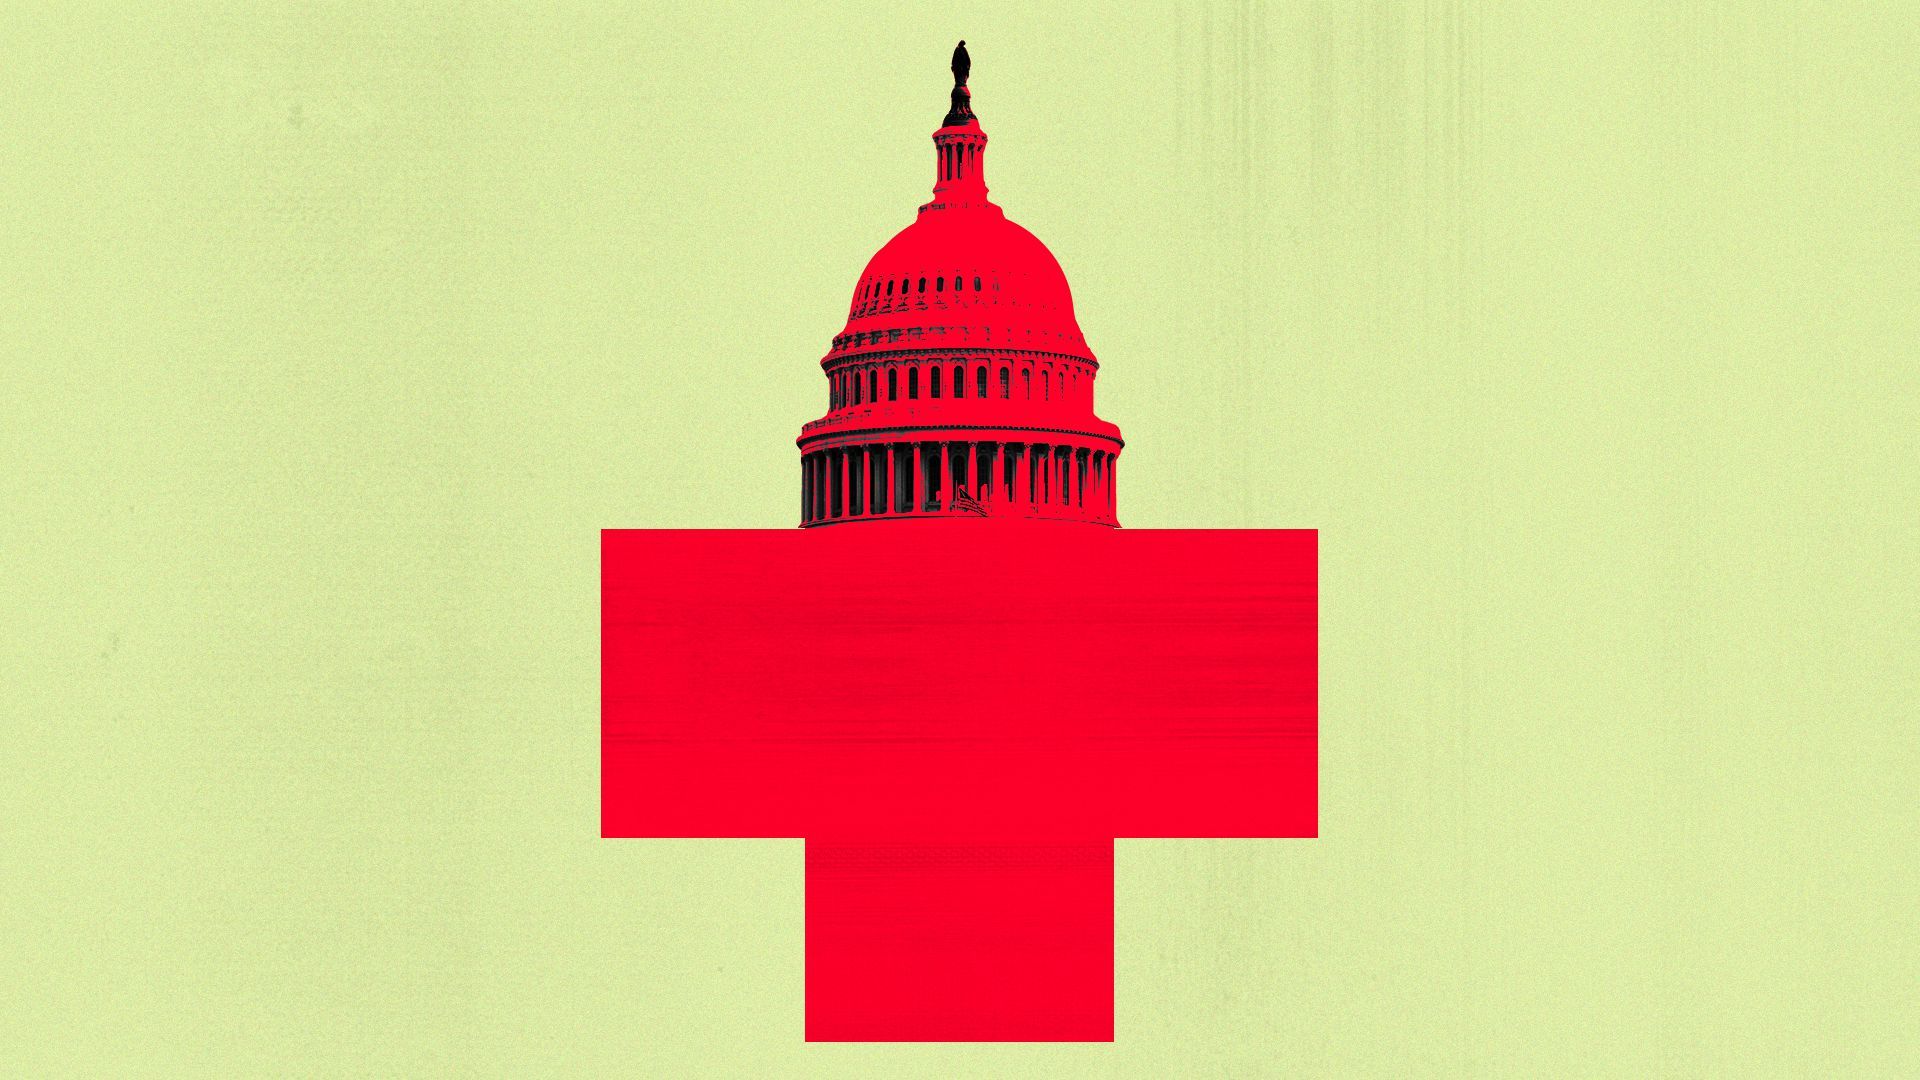 Illustration of the U.S. Capitol forming the top of a red cross symbol.